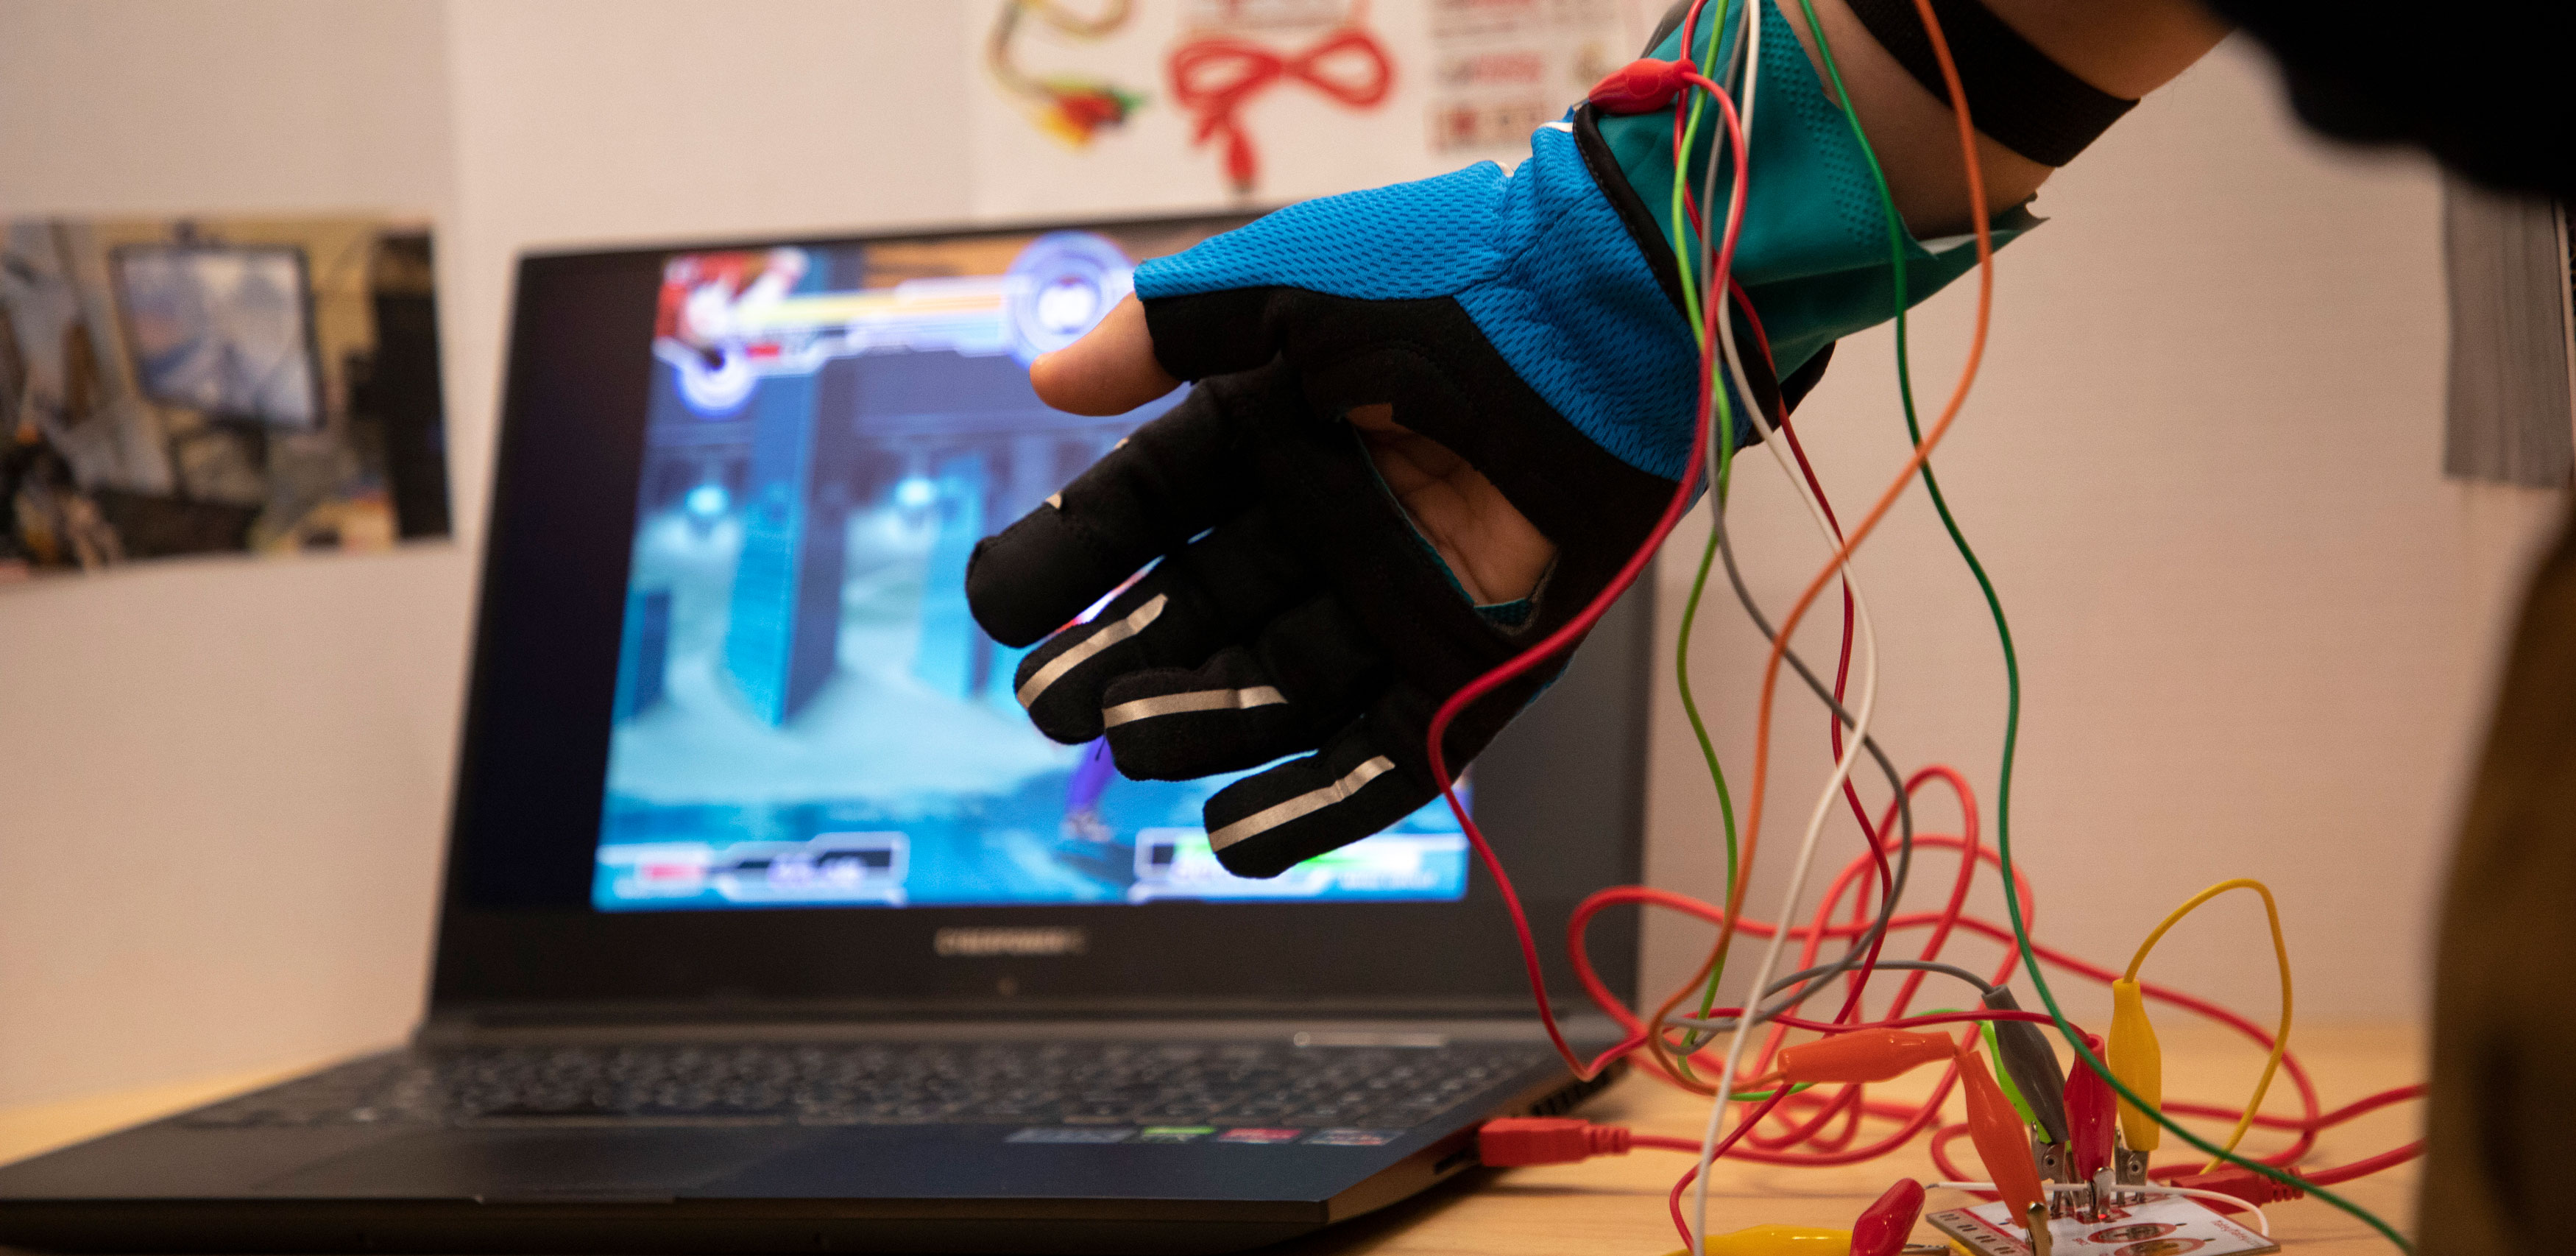 A hand demonstrates a wearable technology glove, connected to various colorful wires. A computer screen is visible in the background.